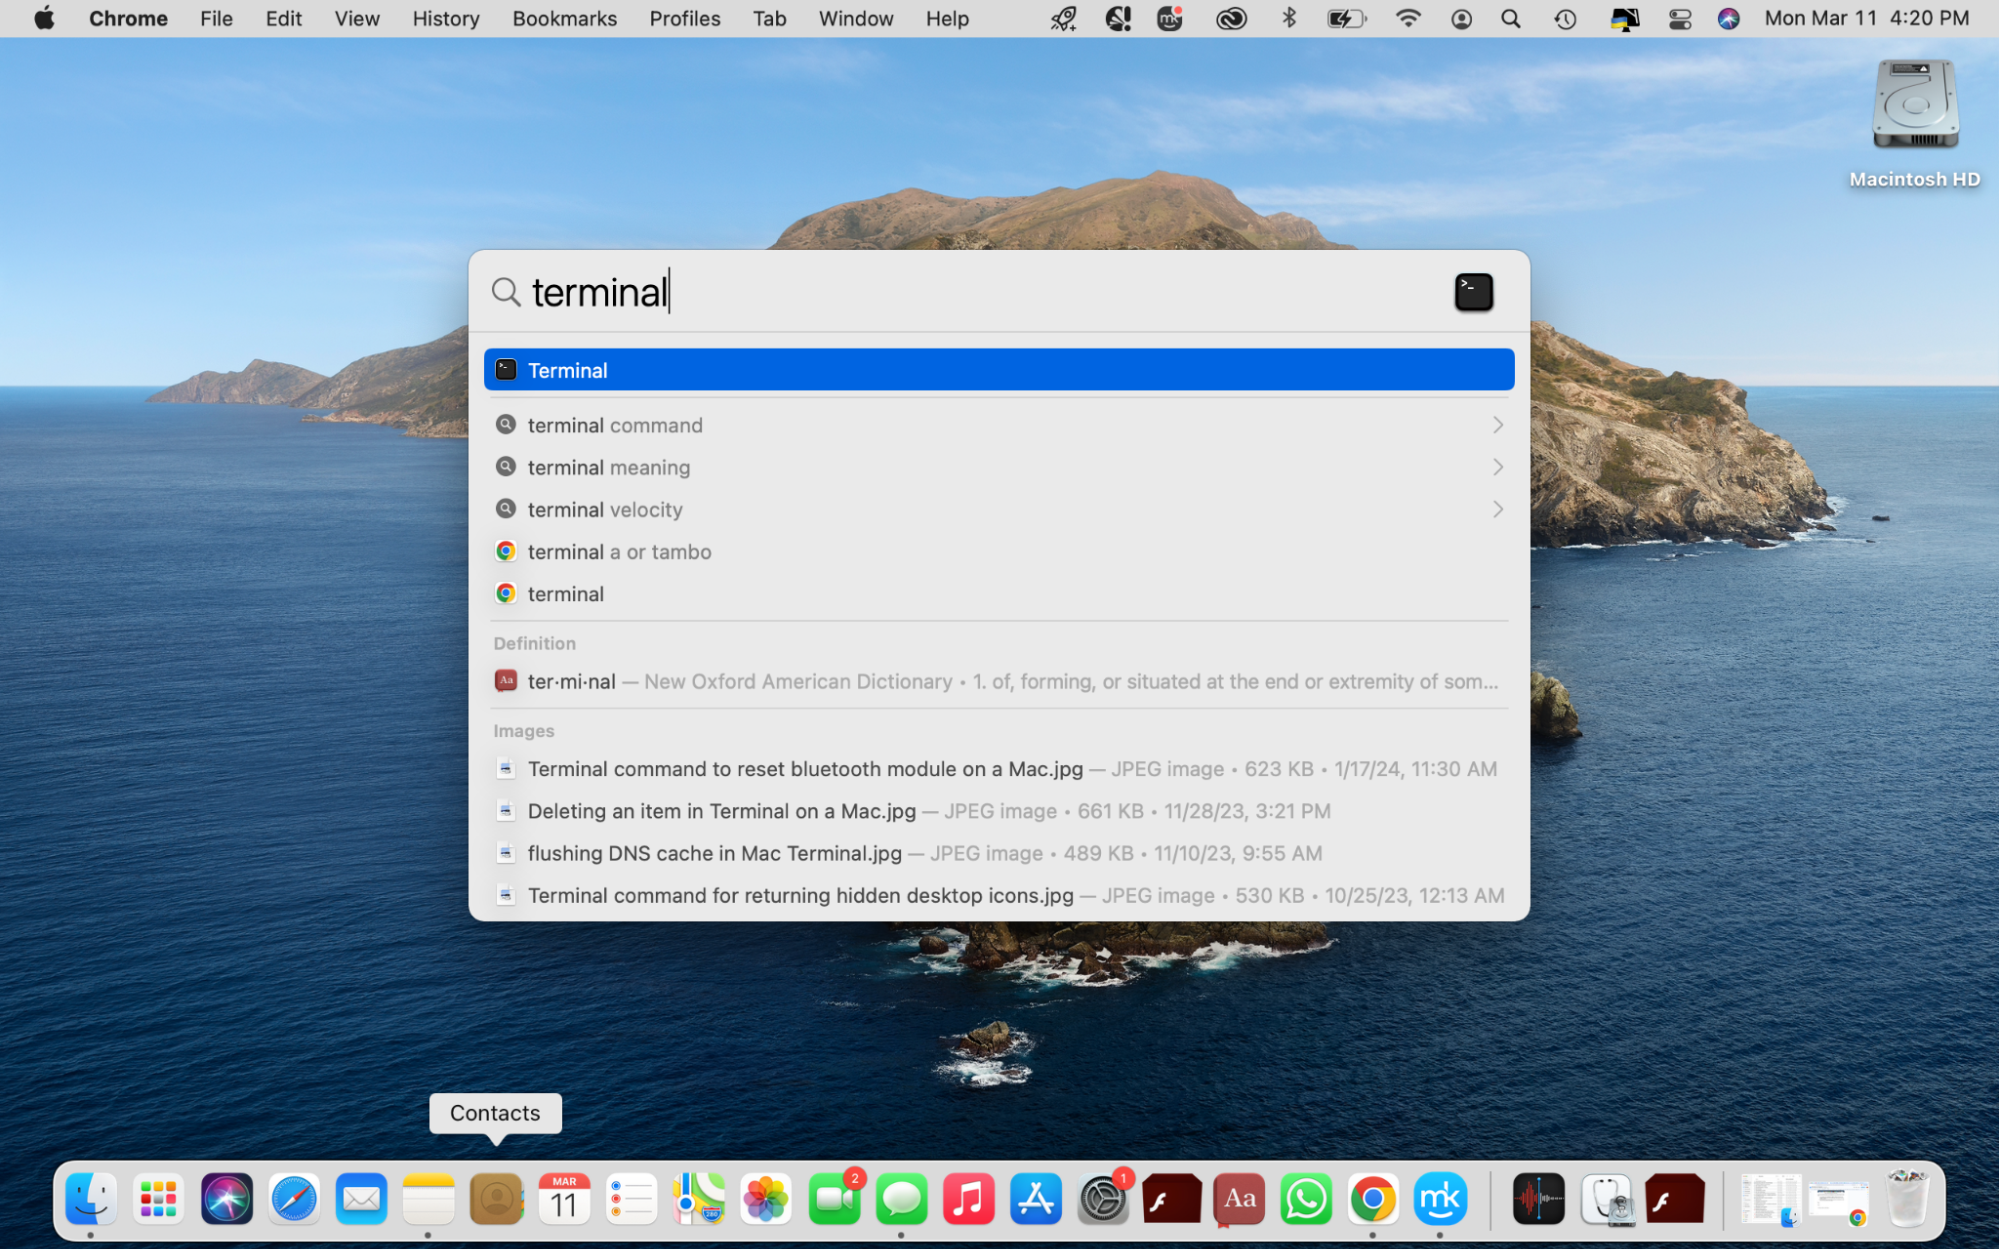 Unhide your Mac's desktop icons using Terminal. To do this, Click on Finder and select Applications > Utilities > Terminal. Alternatively, hit the Command + space bar keys to bring up Spotlight search, type Terminal in the text box, and select it on the list.